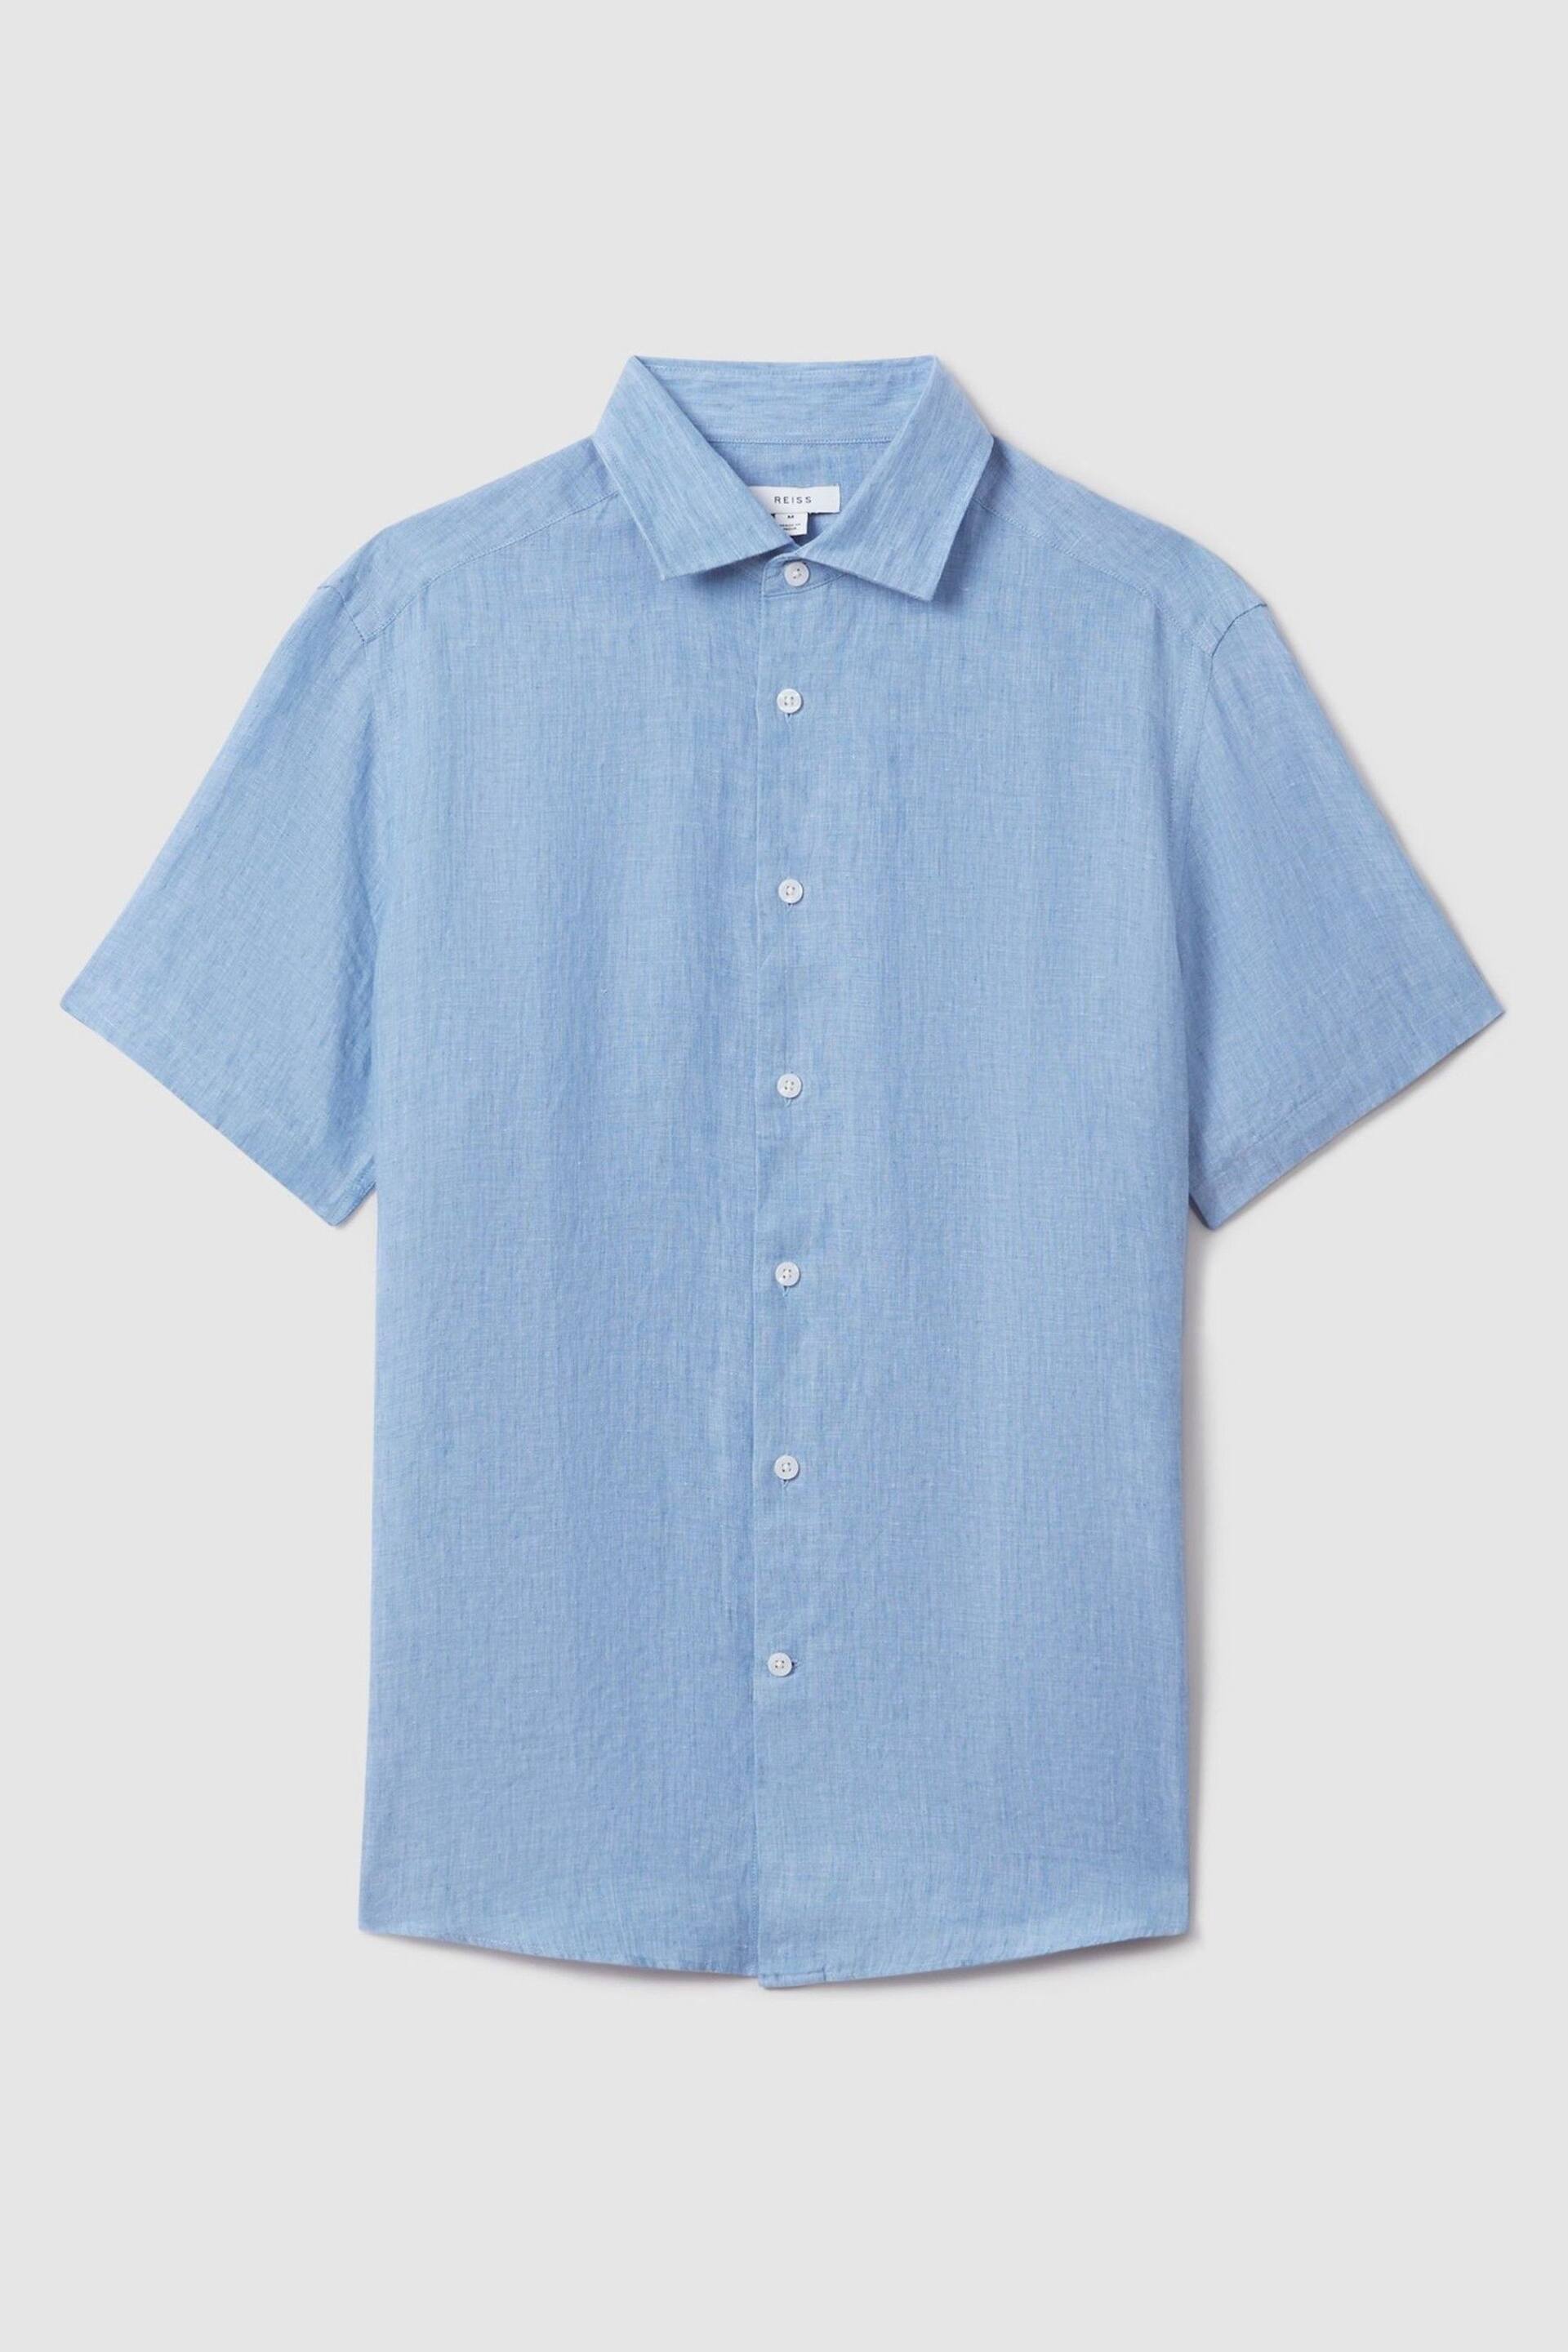 Reiss Sky Blue Holiday Slim Fit Linen Shirt - Image 2 of 6